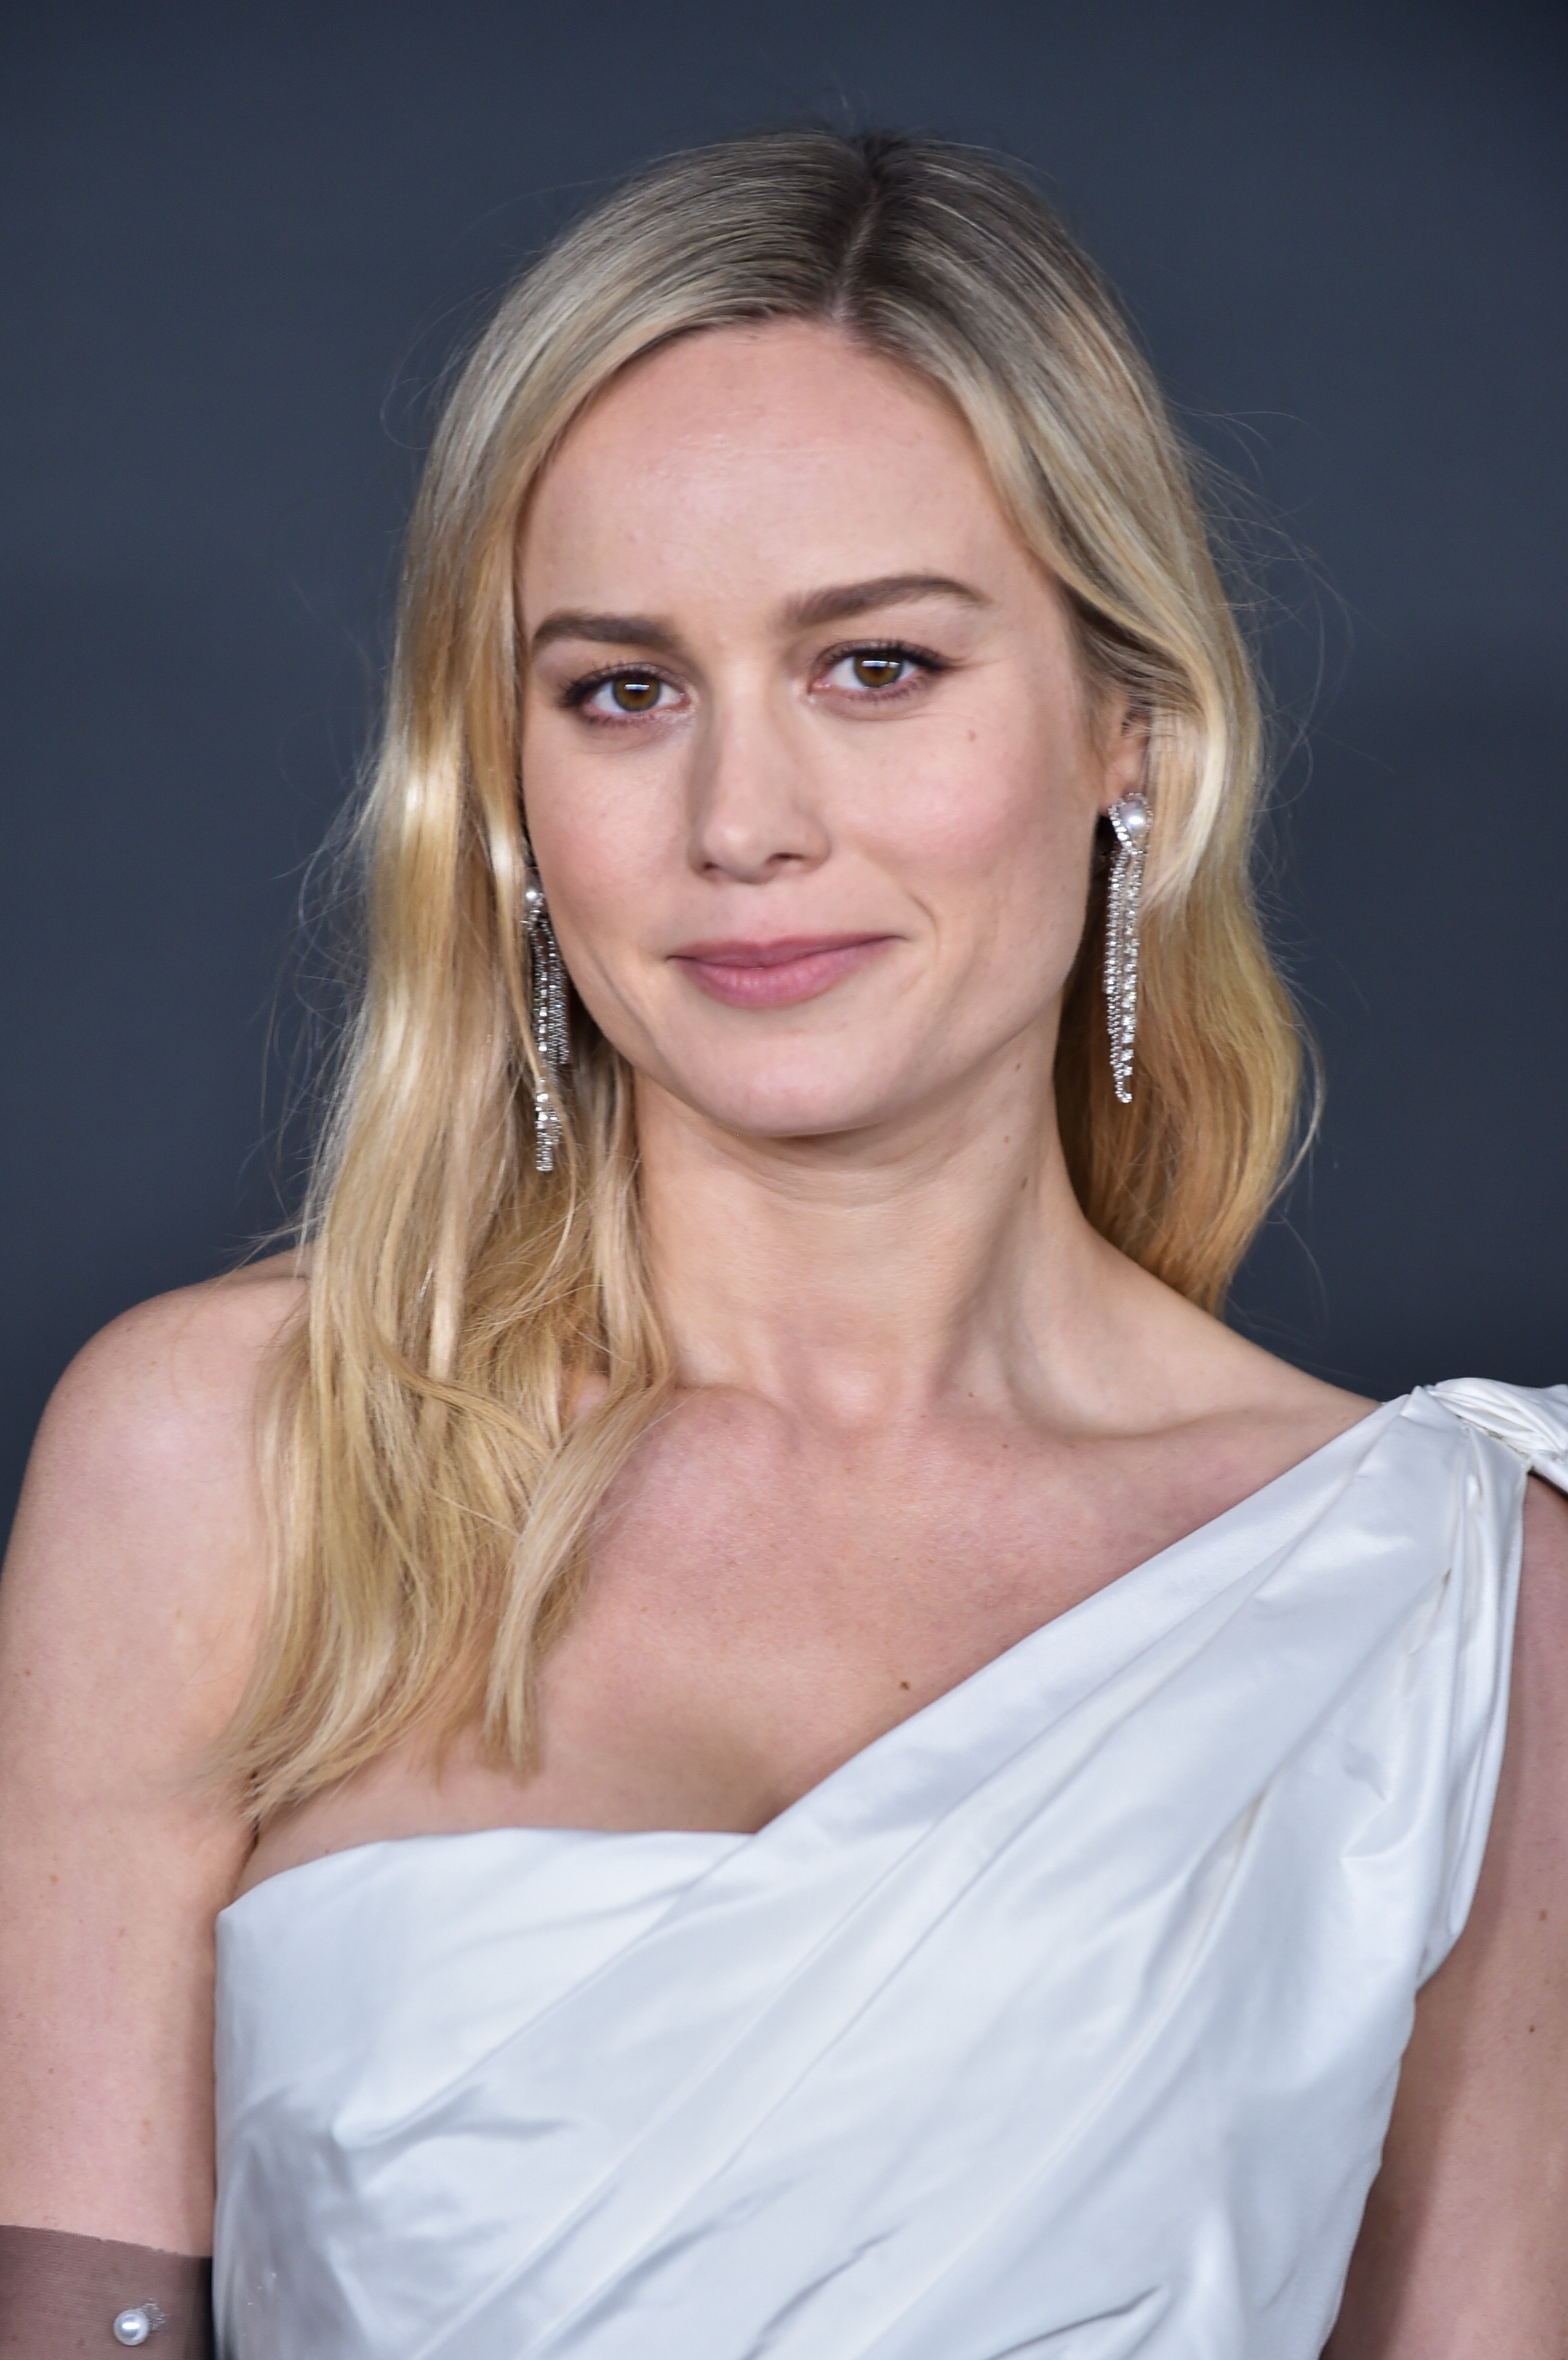 Brie Larson poses at the 51st NAACP Image Awards  on February 22, 2020